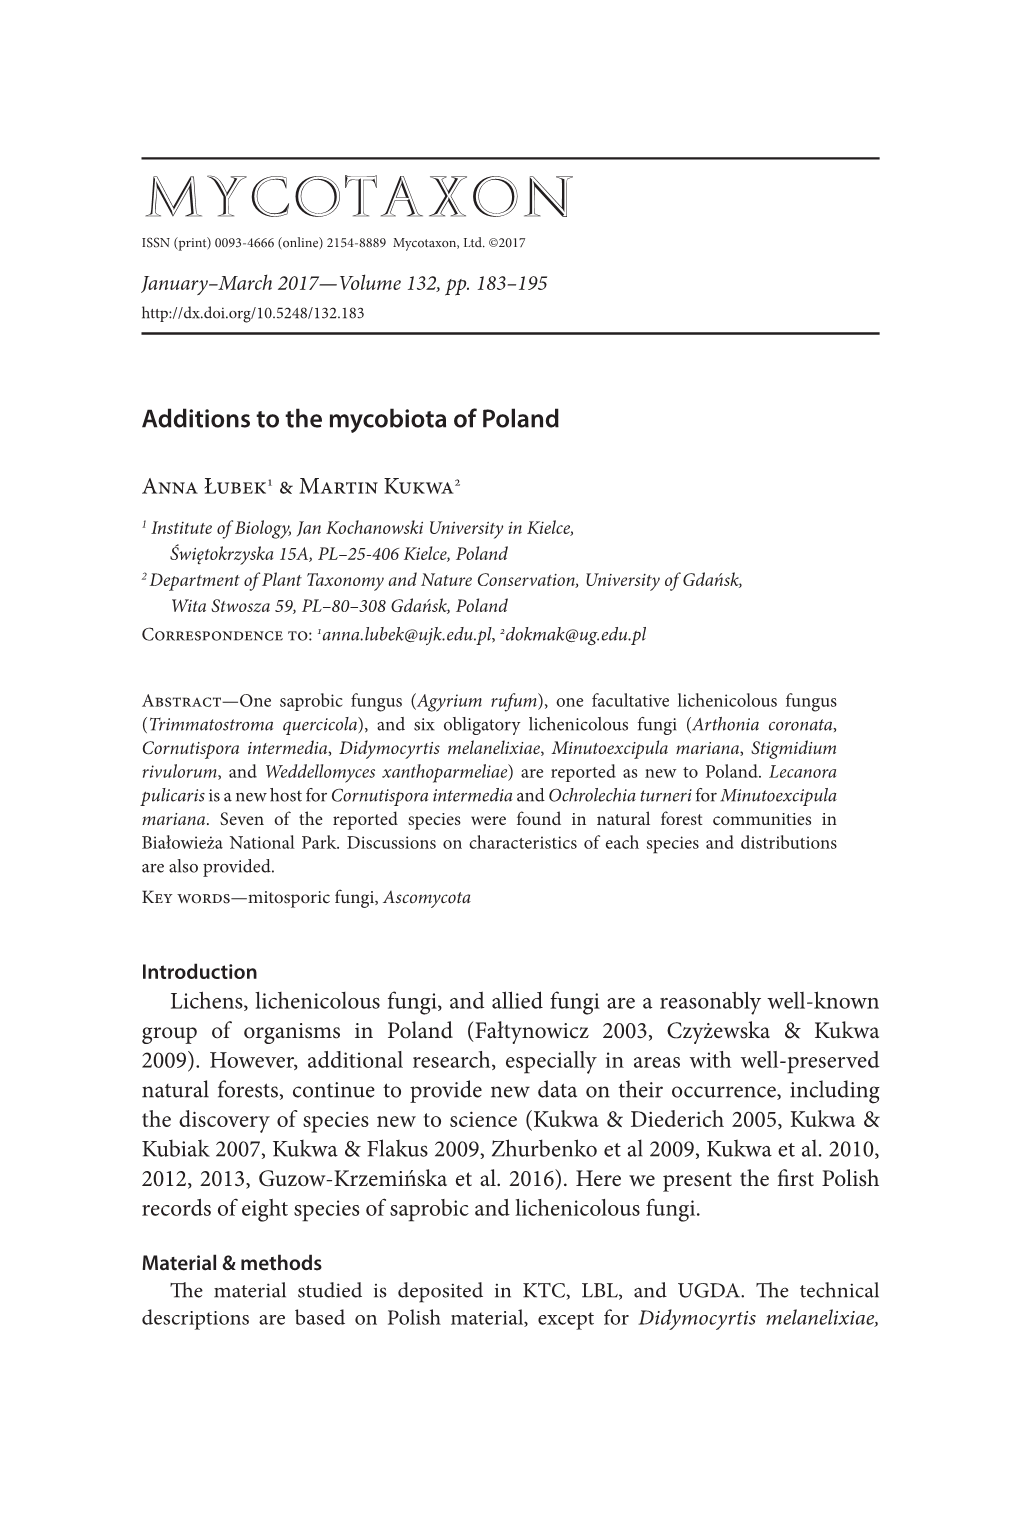 Additions to the Mycobiota of Poland